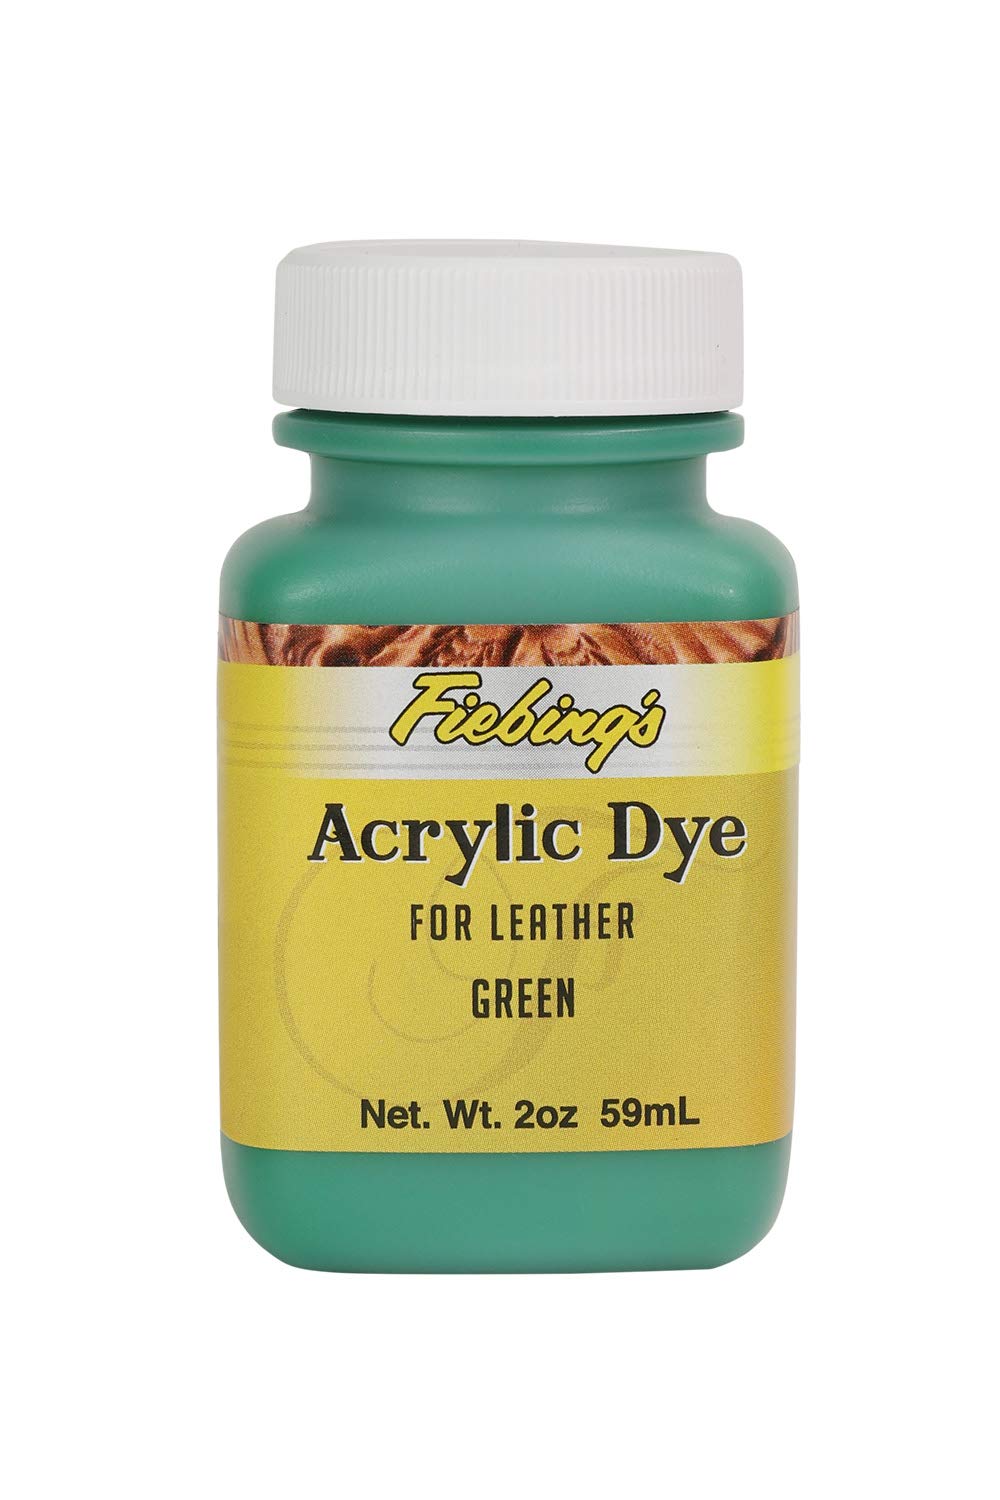 Fiebing's Acrylic Dye - Green - 2oz - for Painting Leather Shoes, Bags, Designs, Scratches, Upholstery, etc